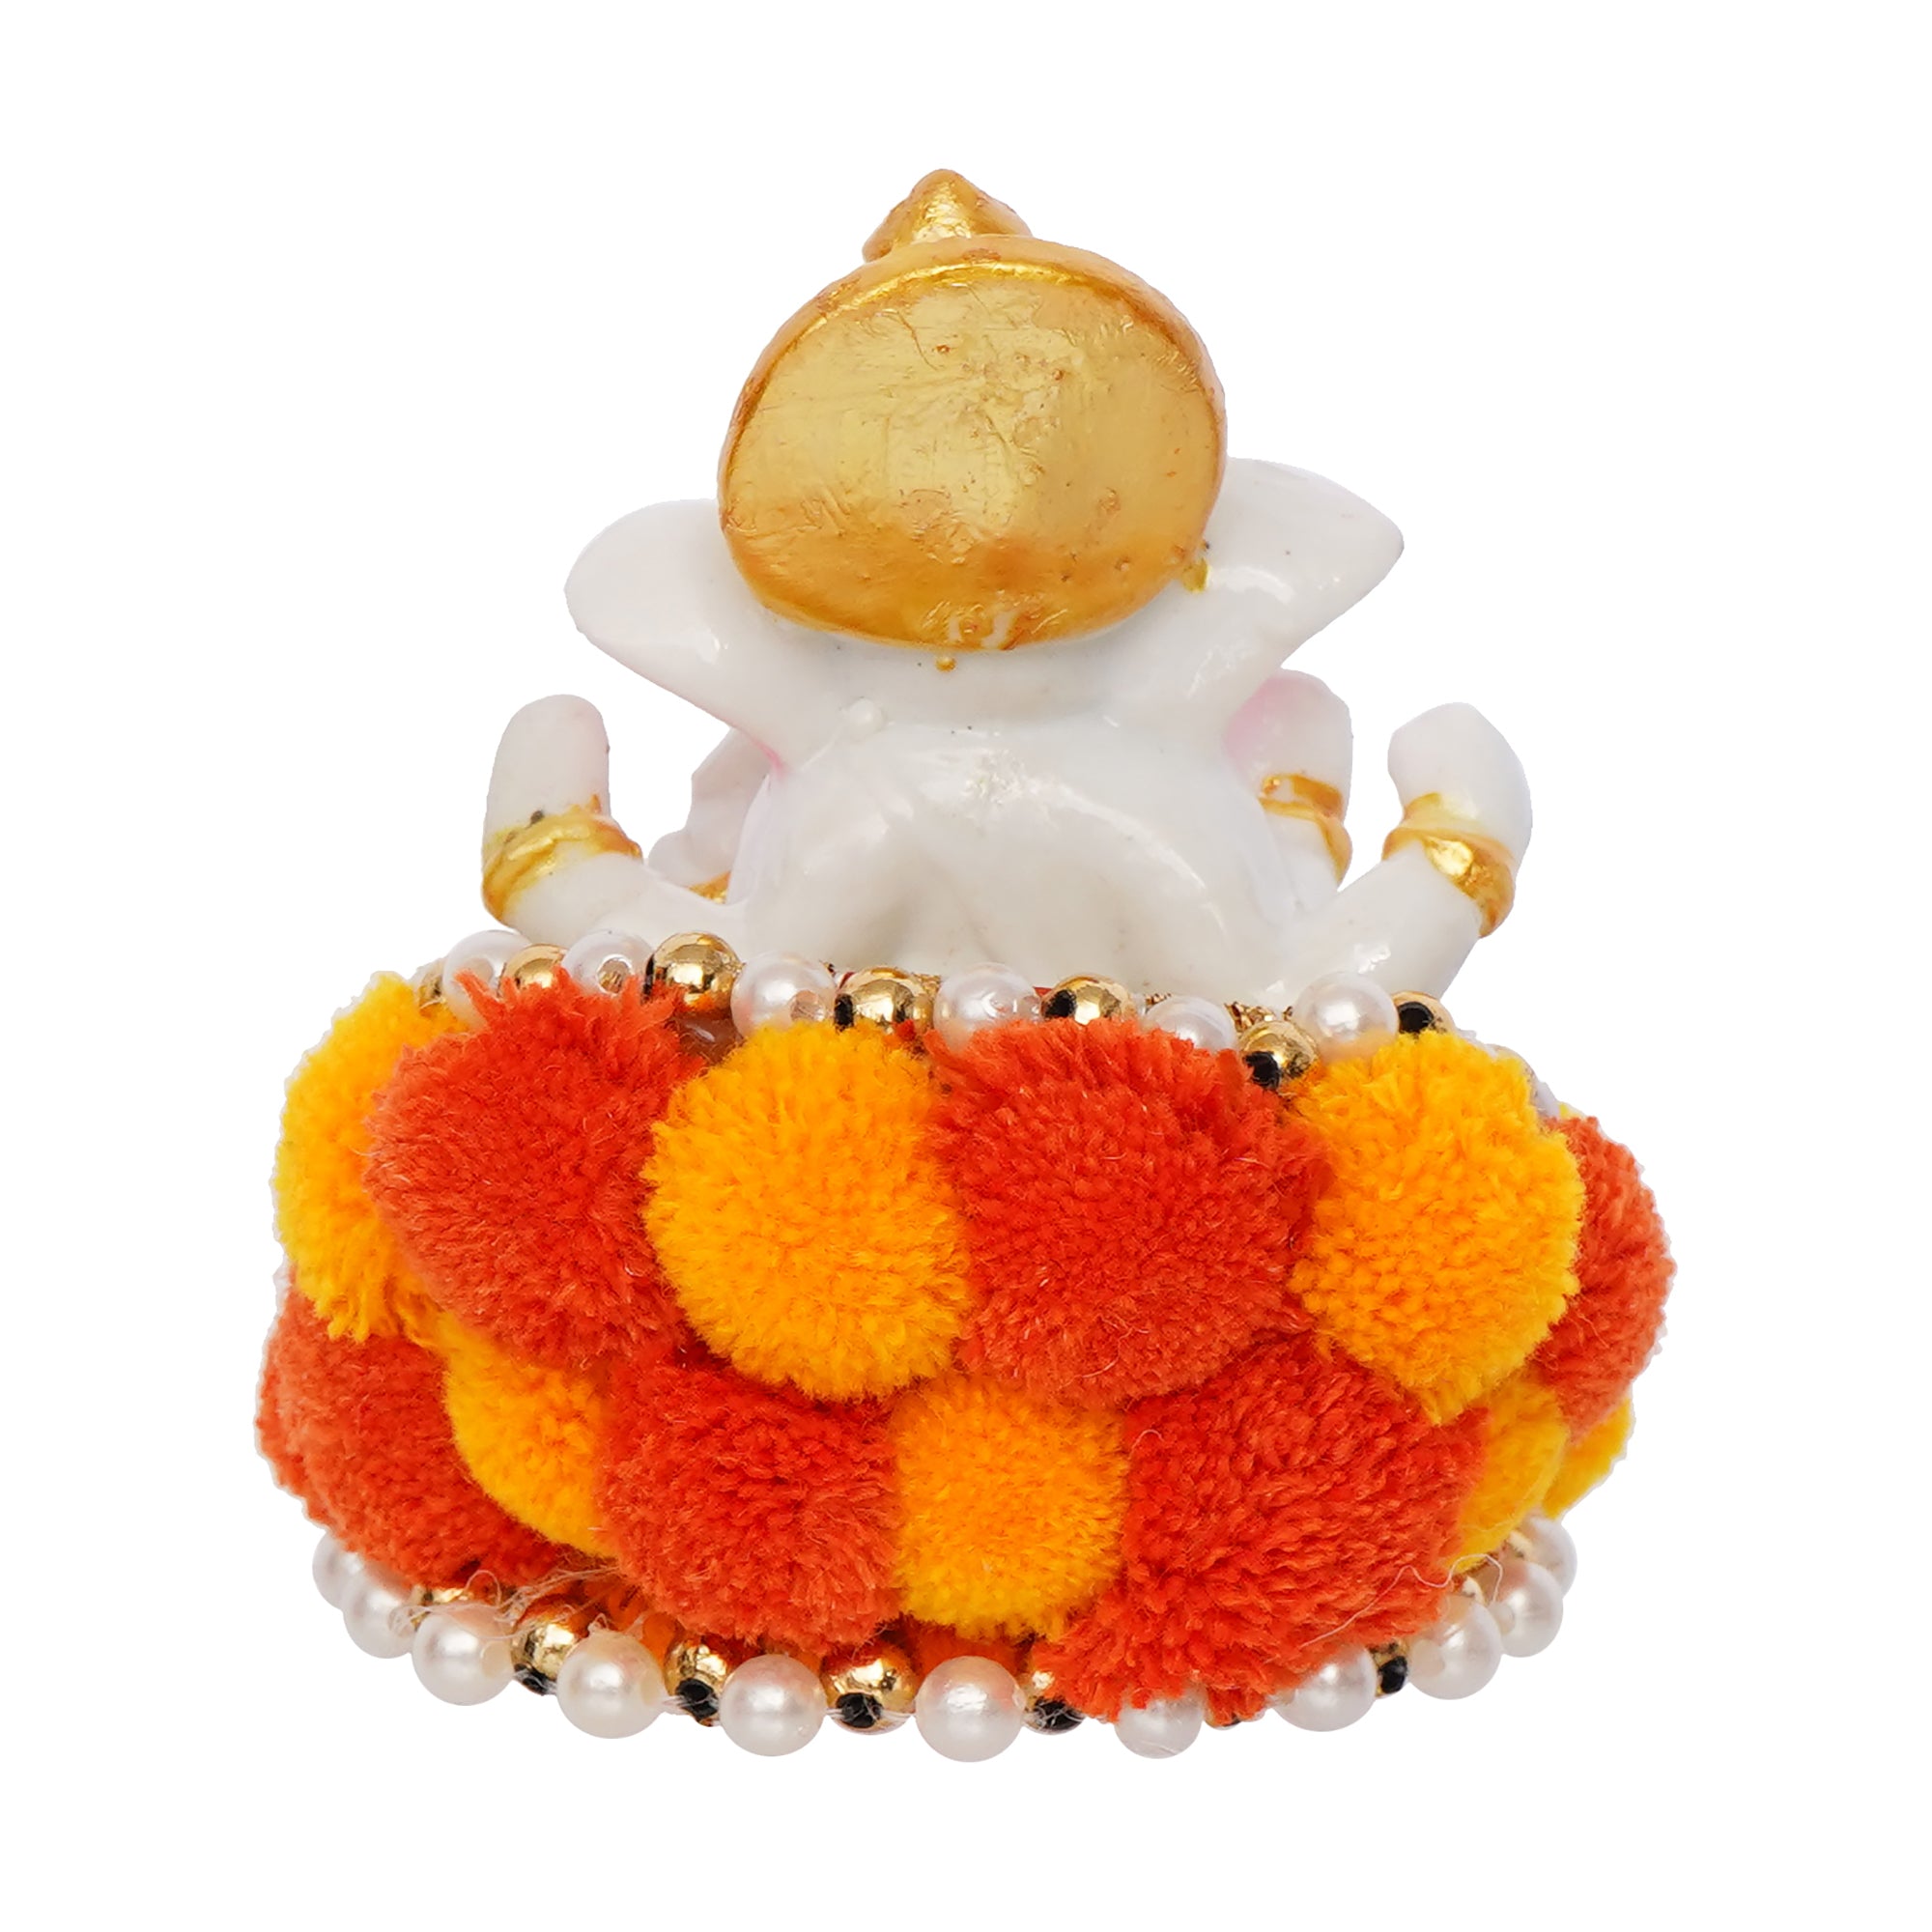 Polyresin Lord Ganesha Idol on Decorative Handcrafted Floral Plate for Home and Car Dashboard 6